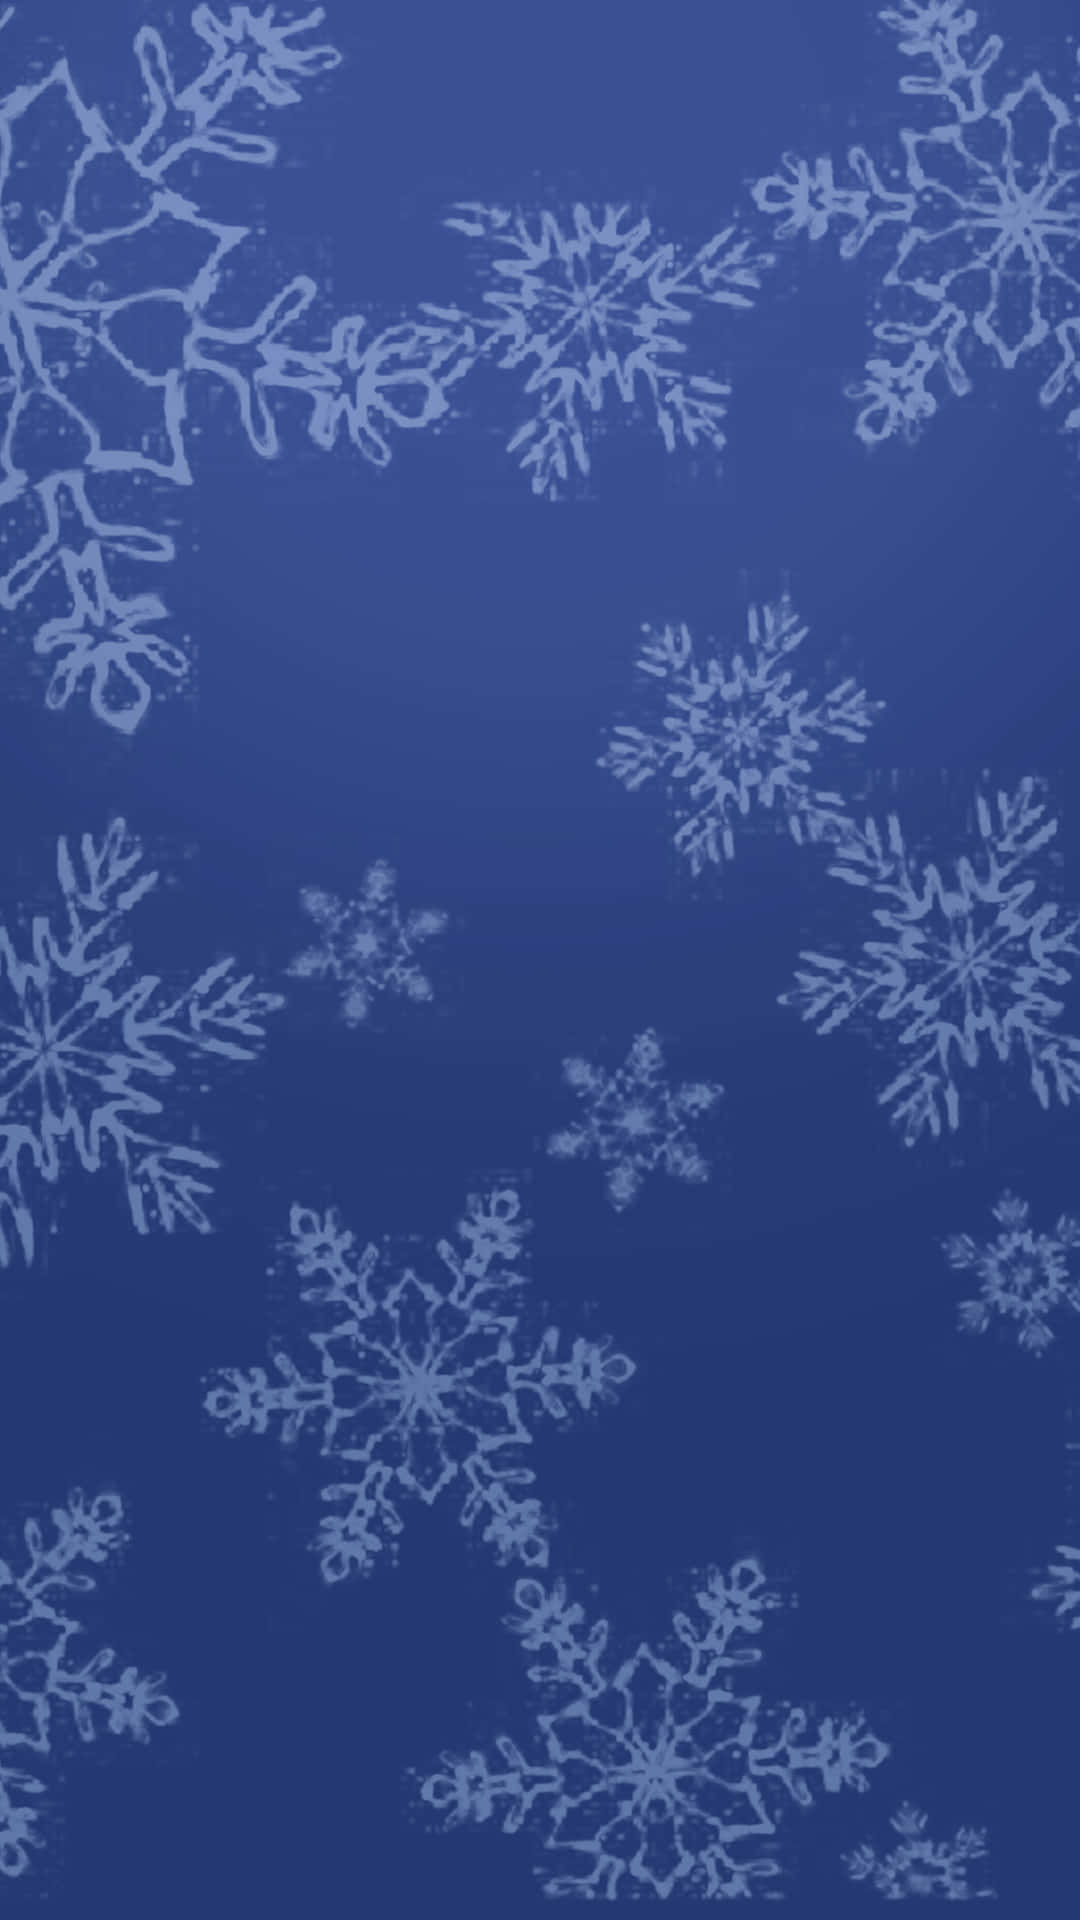 Festive Christmas Background with Ornaments and Snowflakes Wallpaper